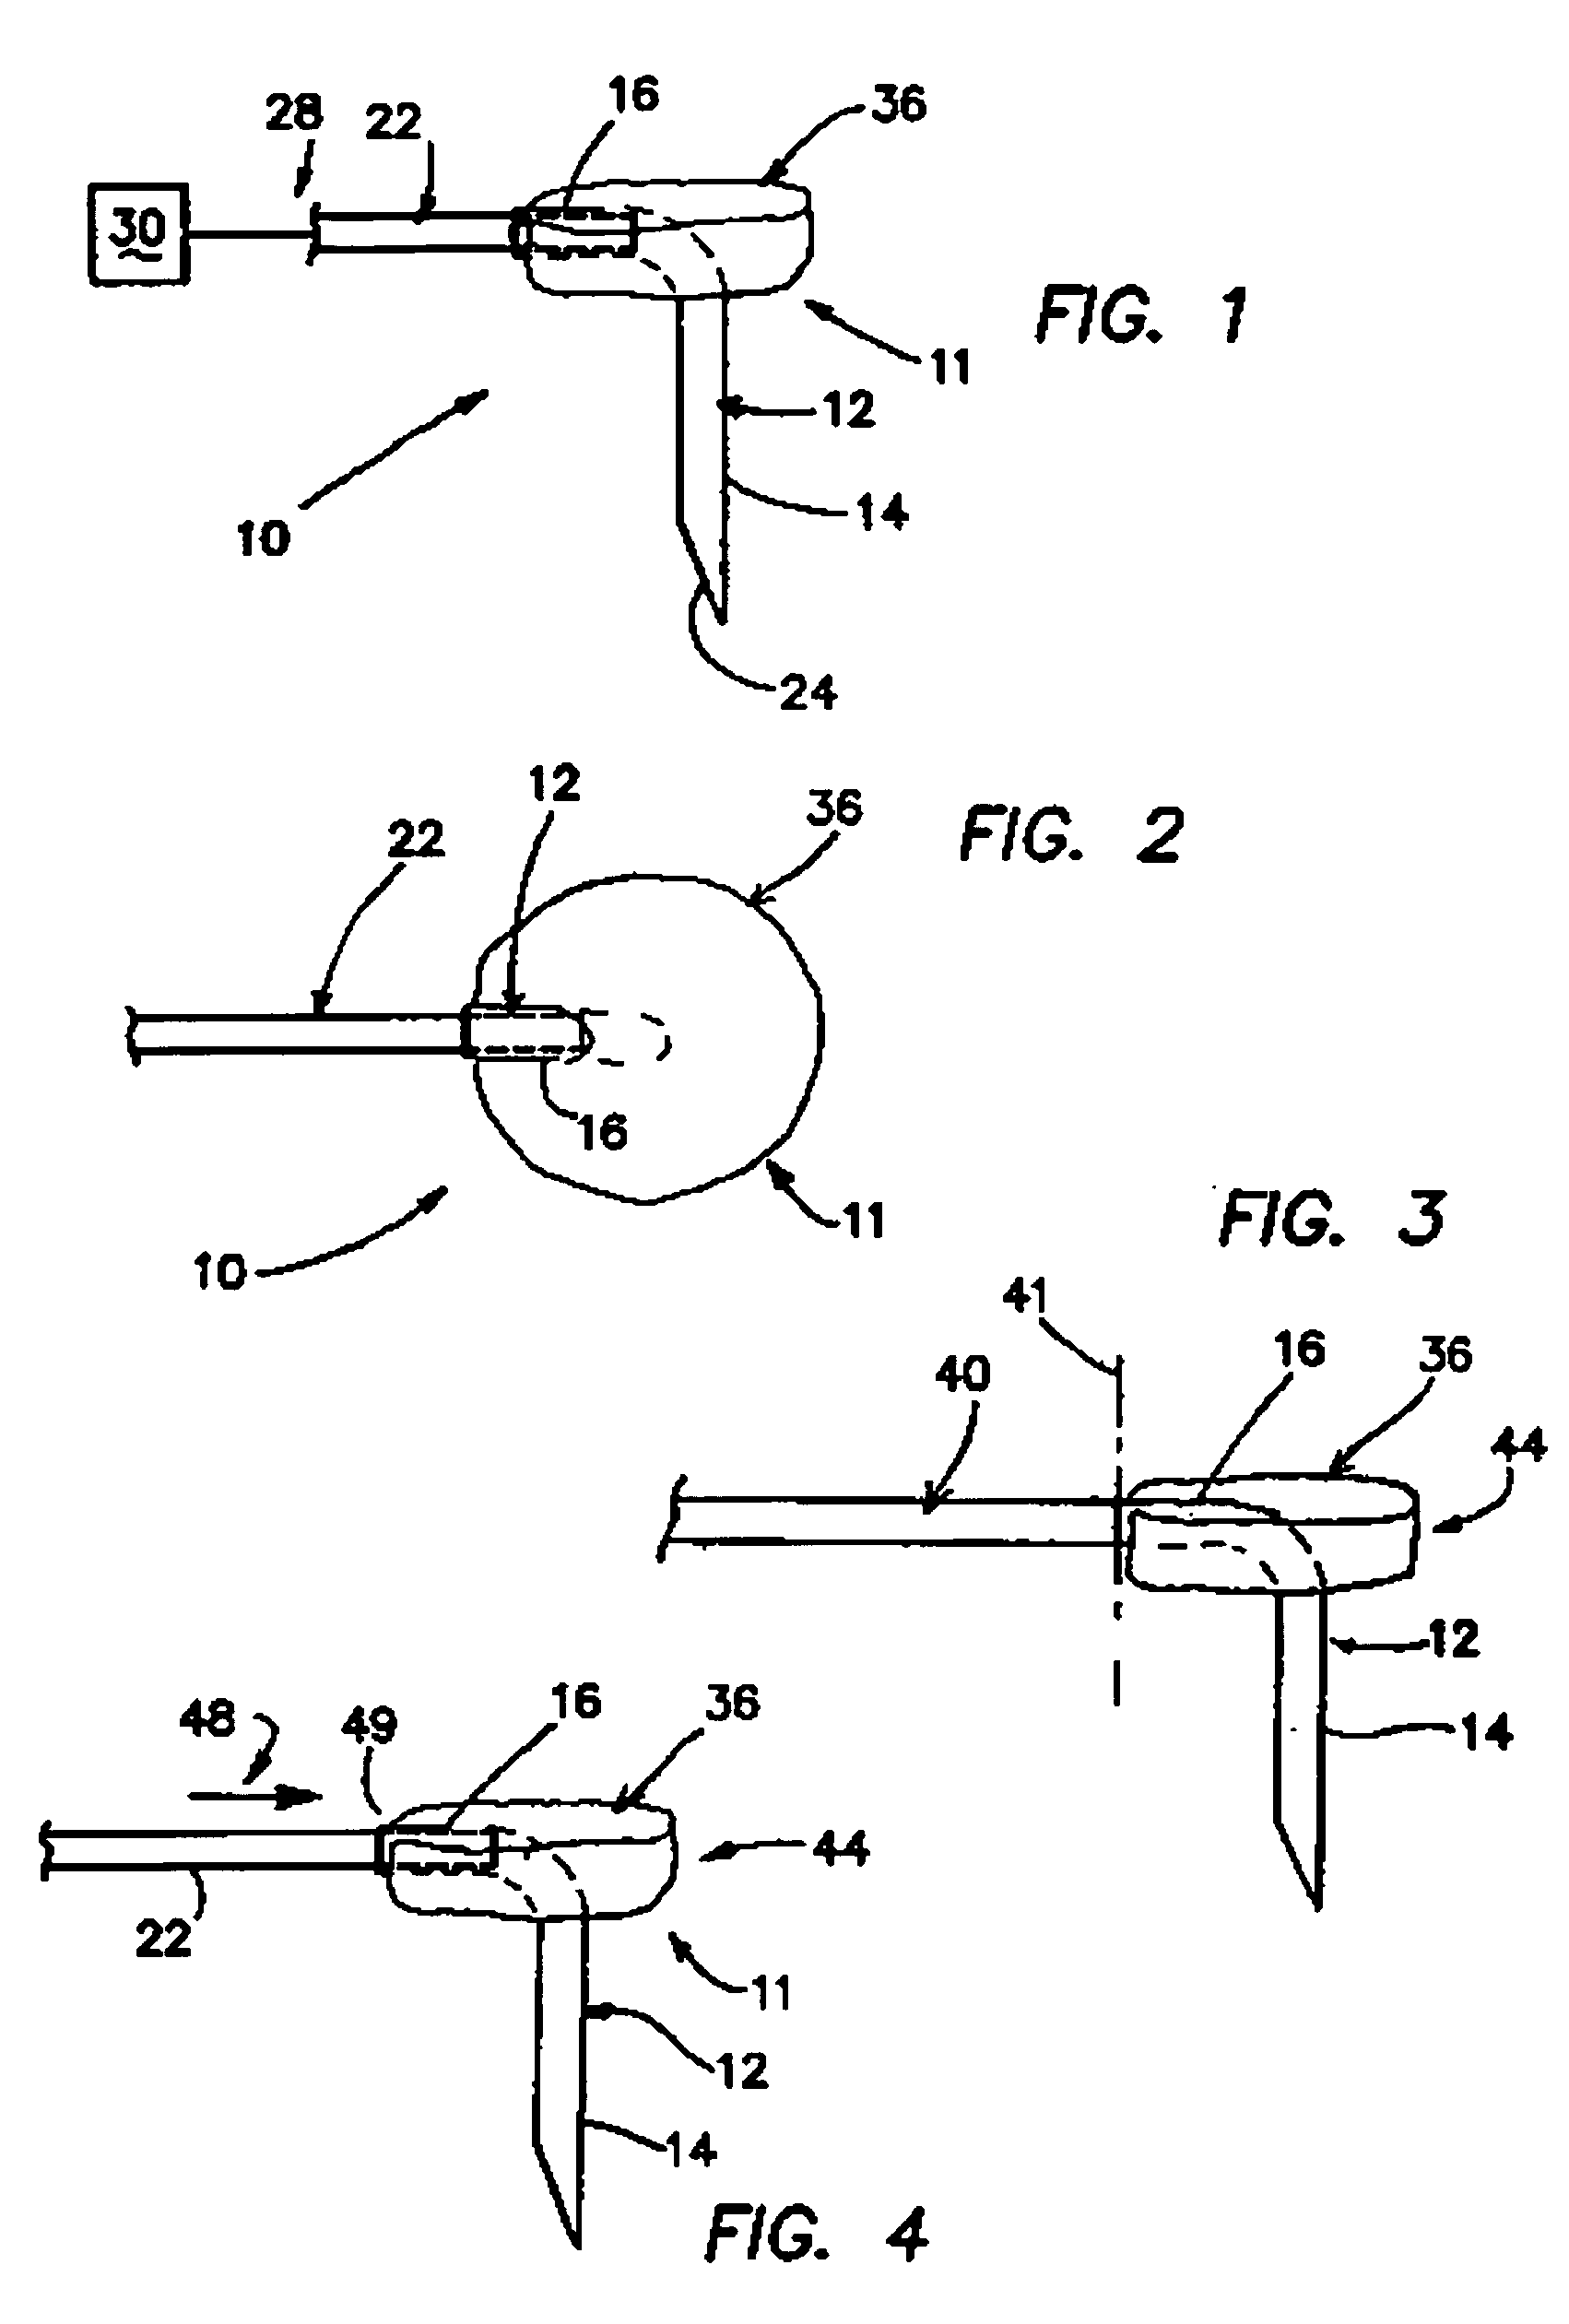 Apparatus and methods useful for monitoring intraocular pressure